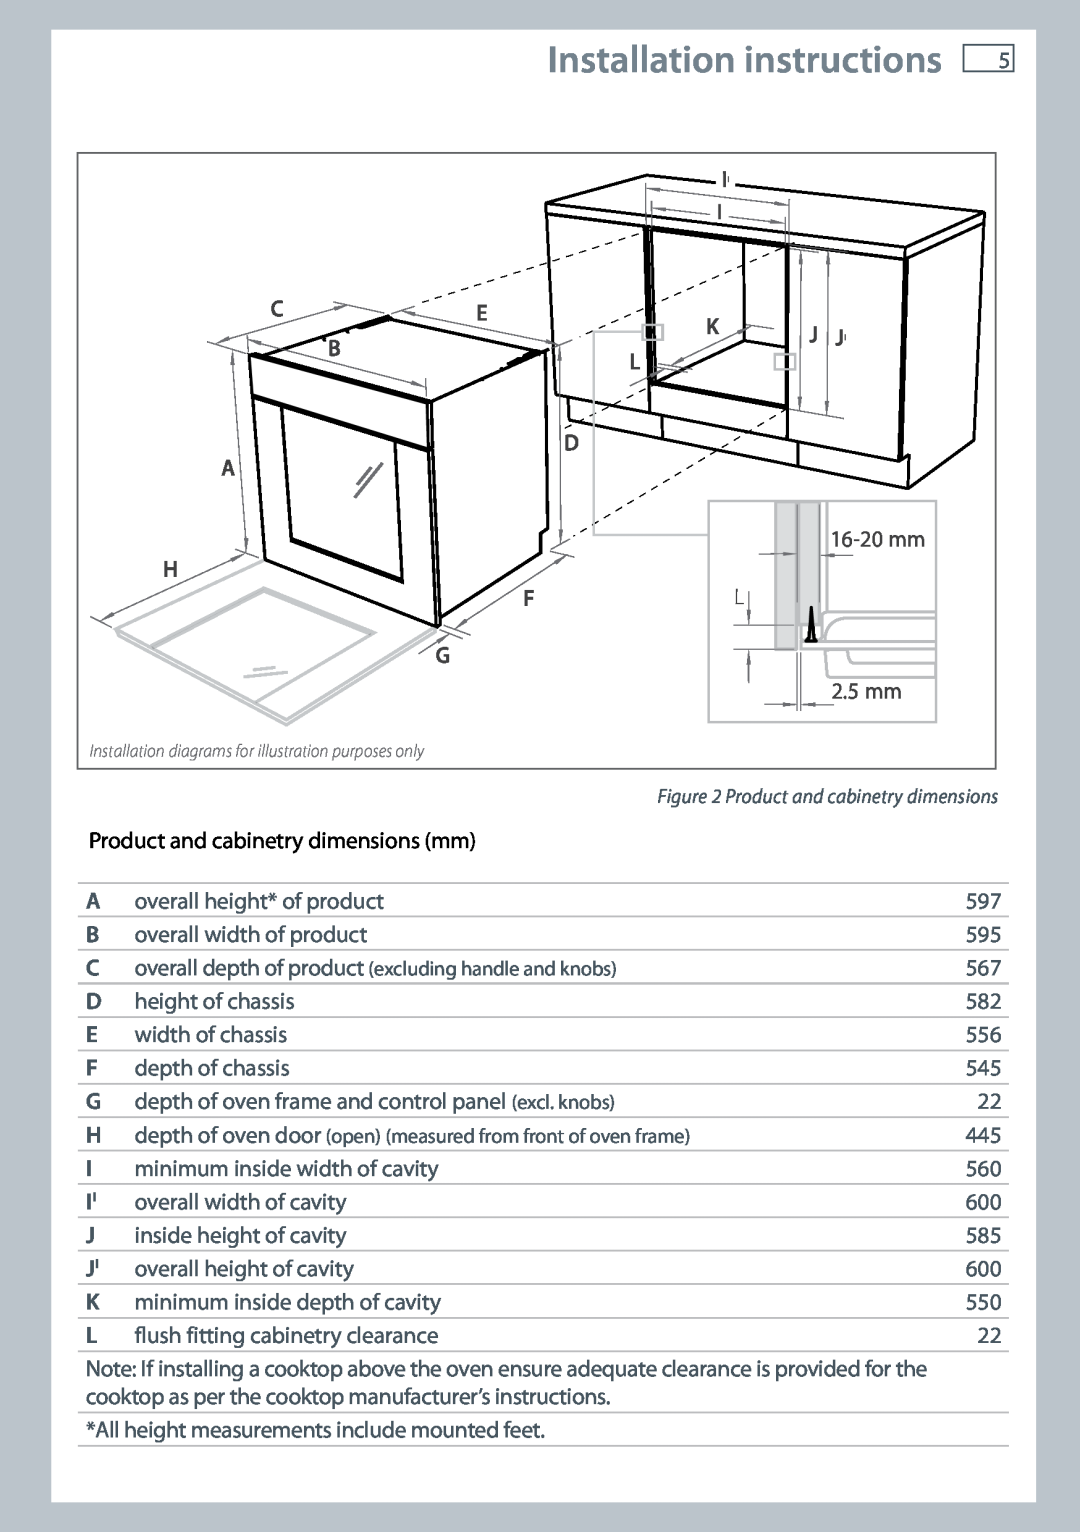 Fisher & Paykel OB60 installation instructions Installation instructions, H Fl G, 16-20 mm 2.5 mm 